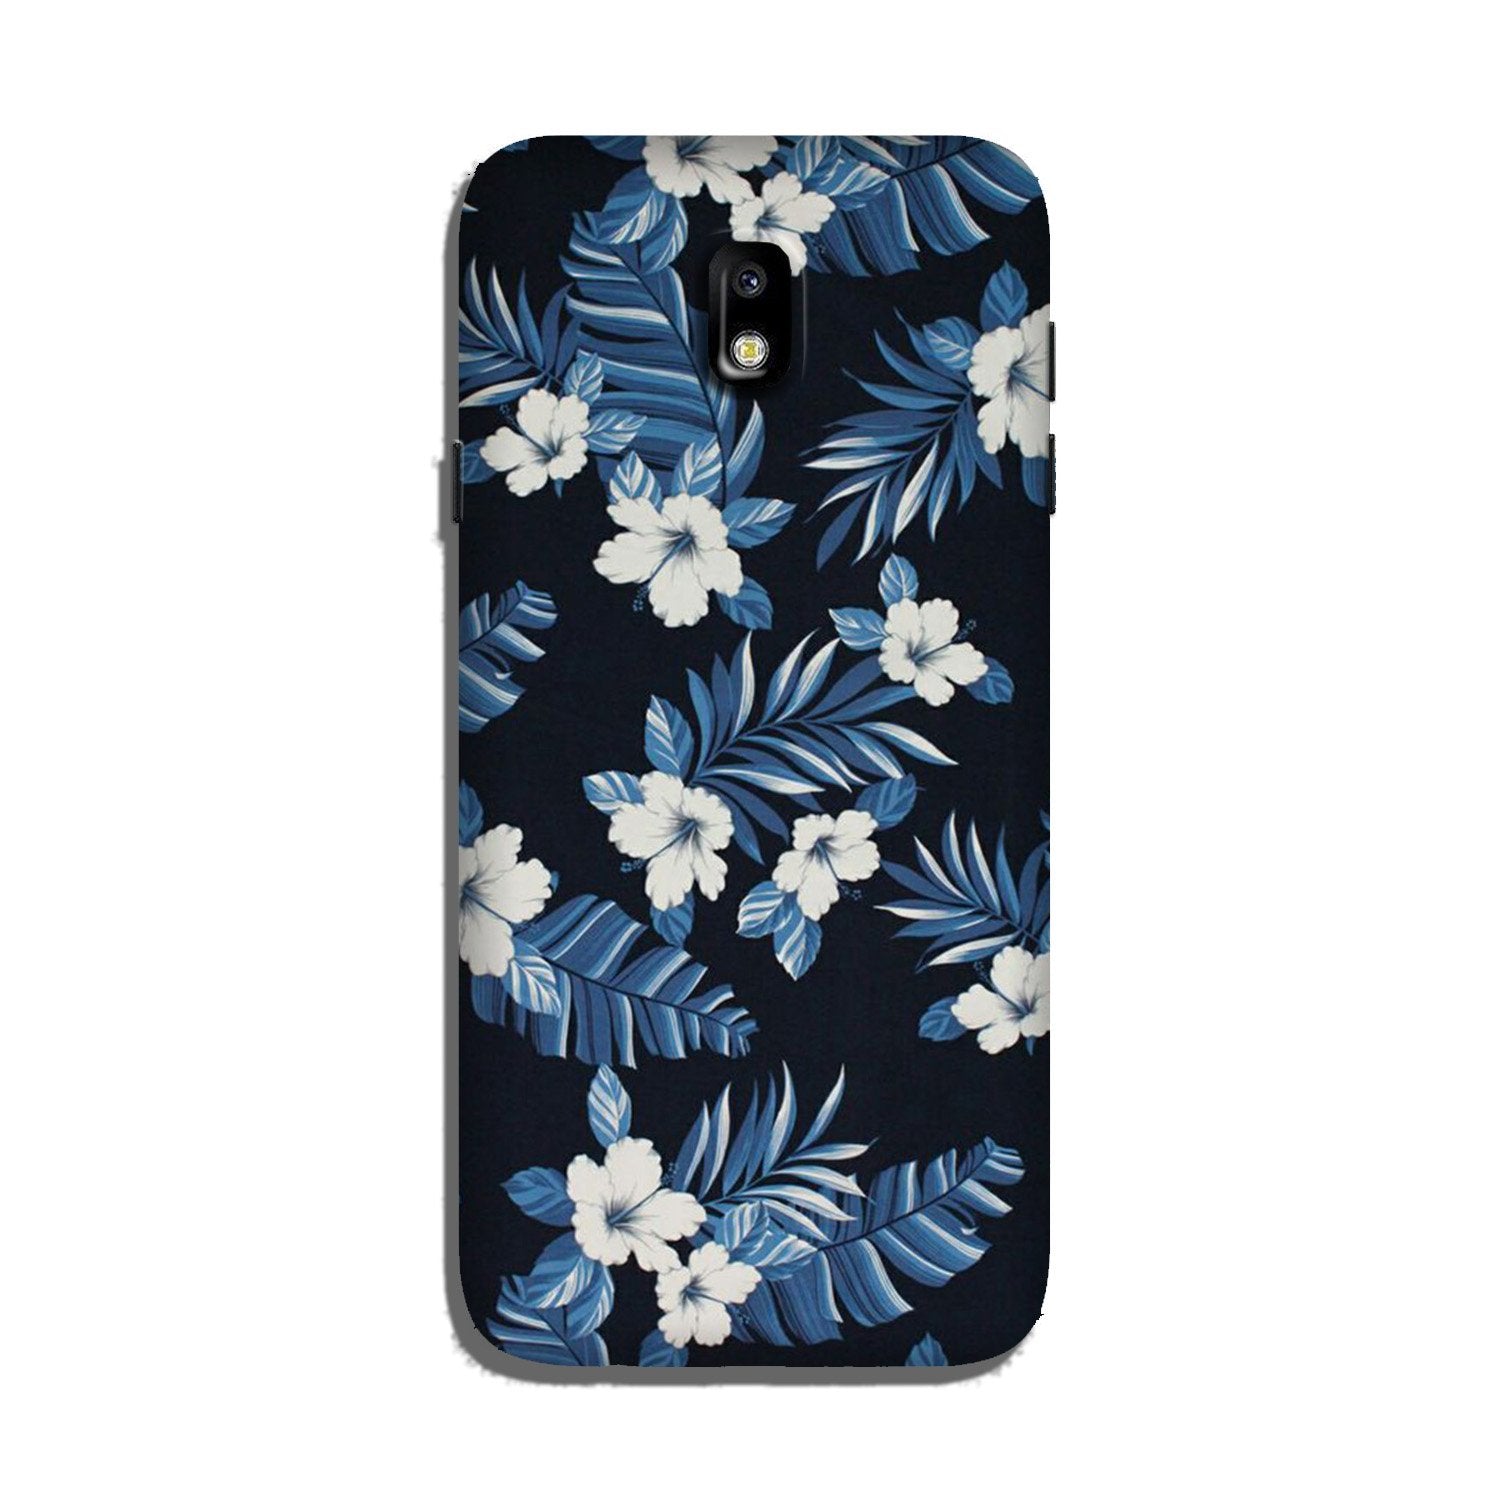 White flowers Blue Background2 Case for Galaxy J3 Pro